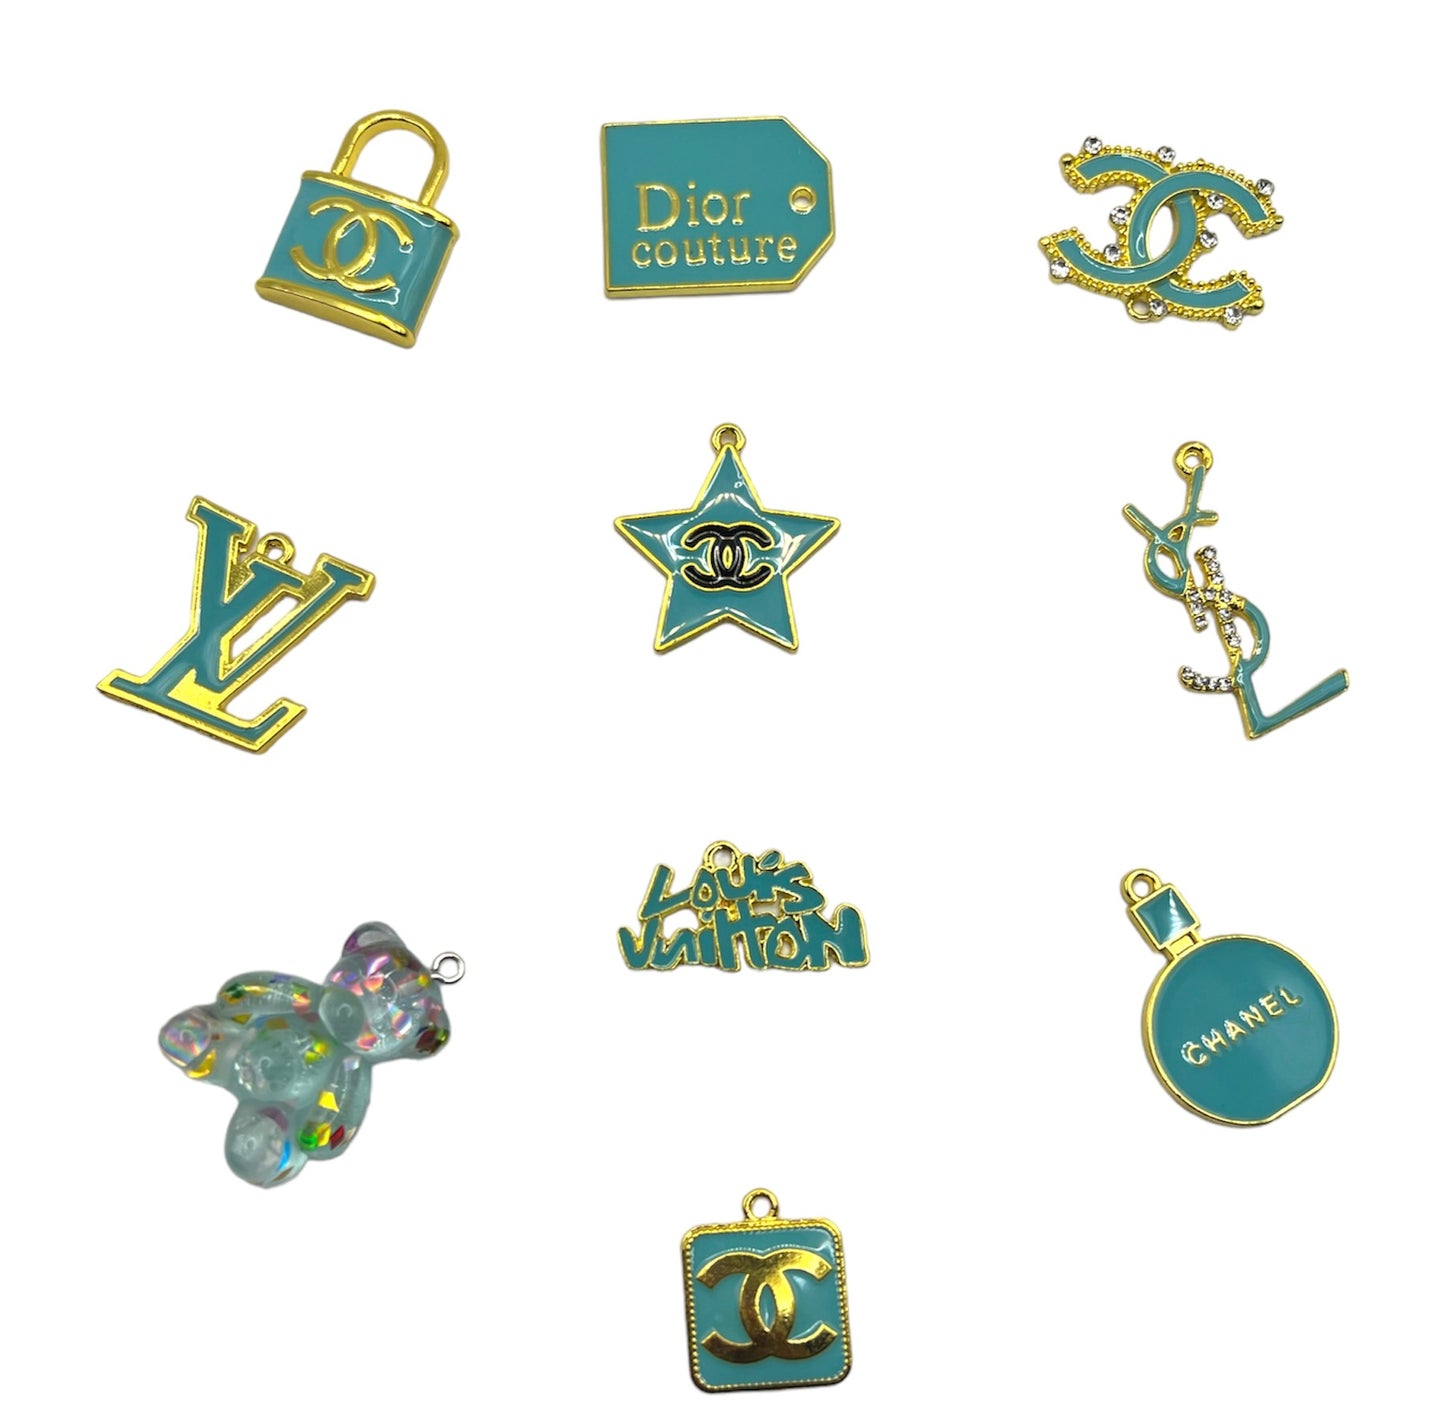 Teal Lock Charm Set Trimmed in Gold Set-Comes With 10 Charms